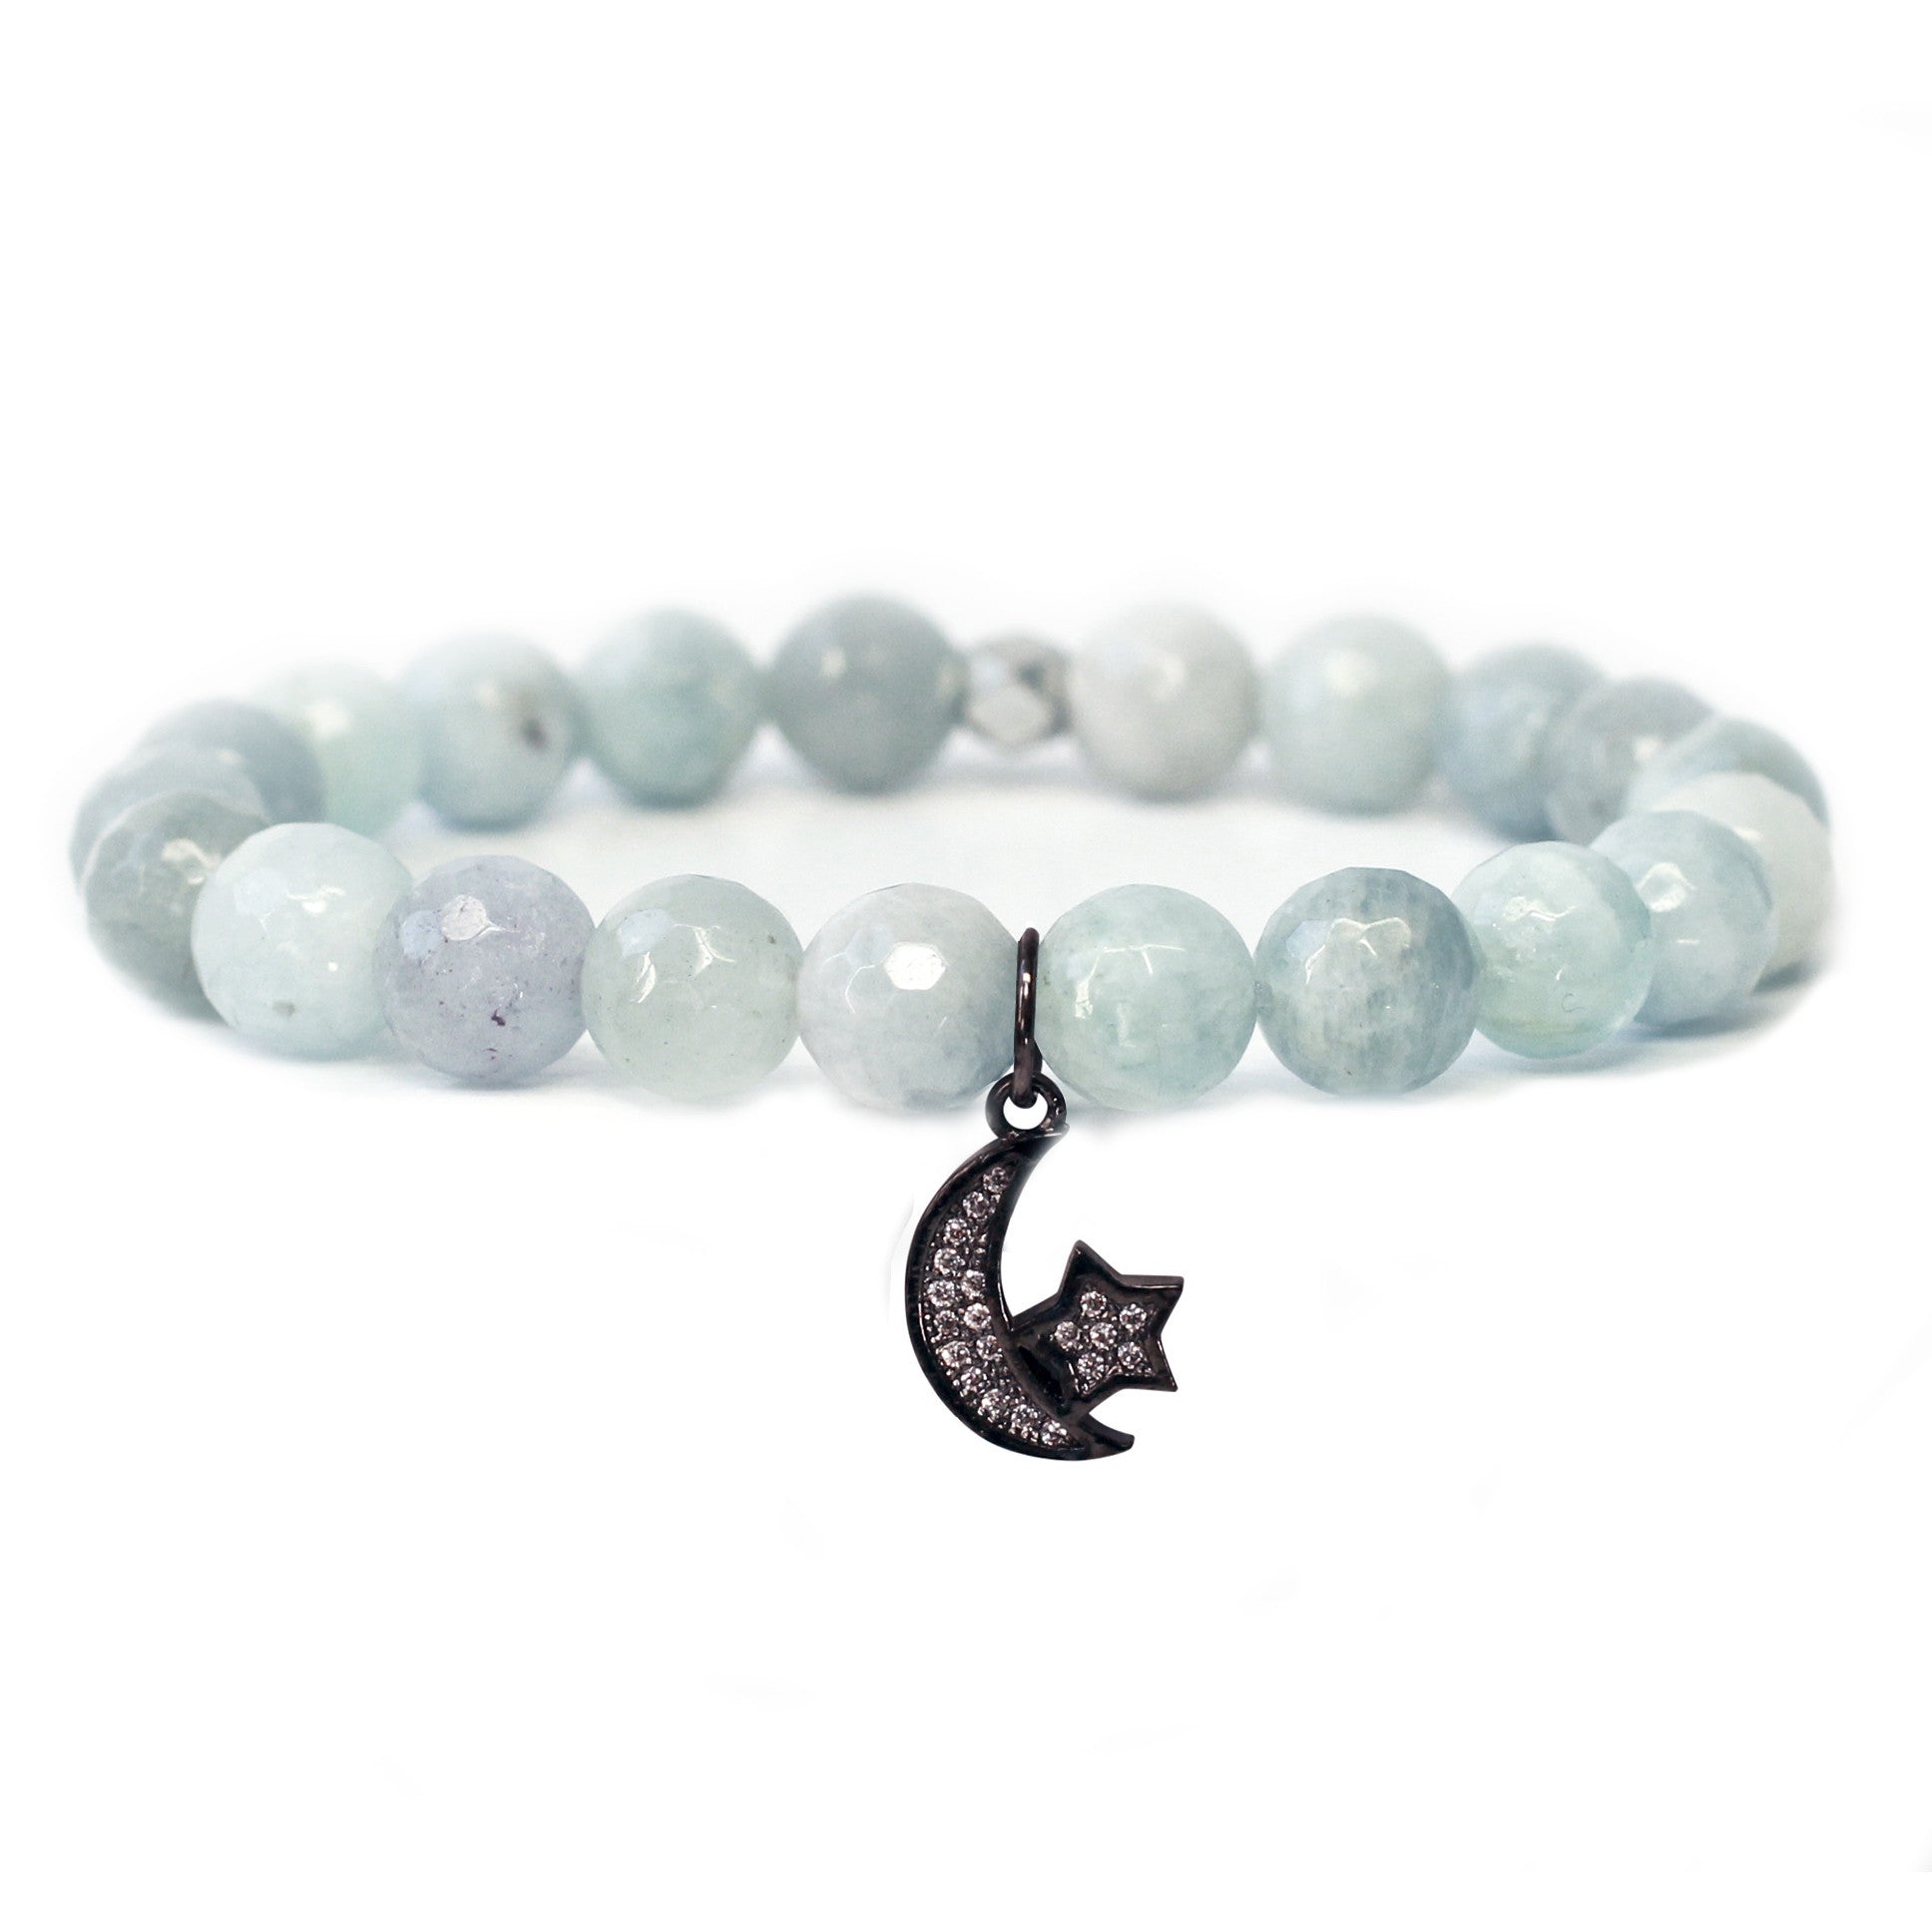 The Moon & Stars Charm in Blue Bead with Silver